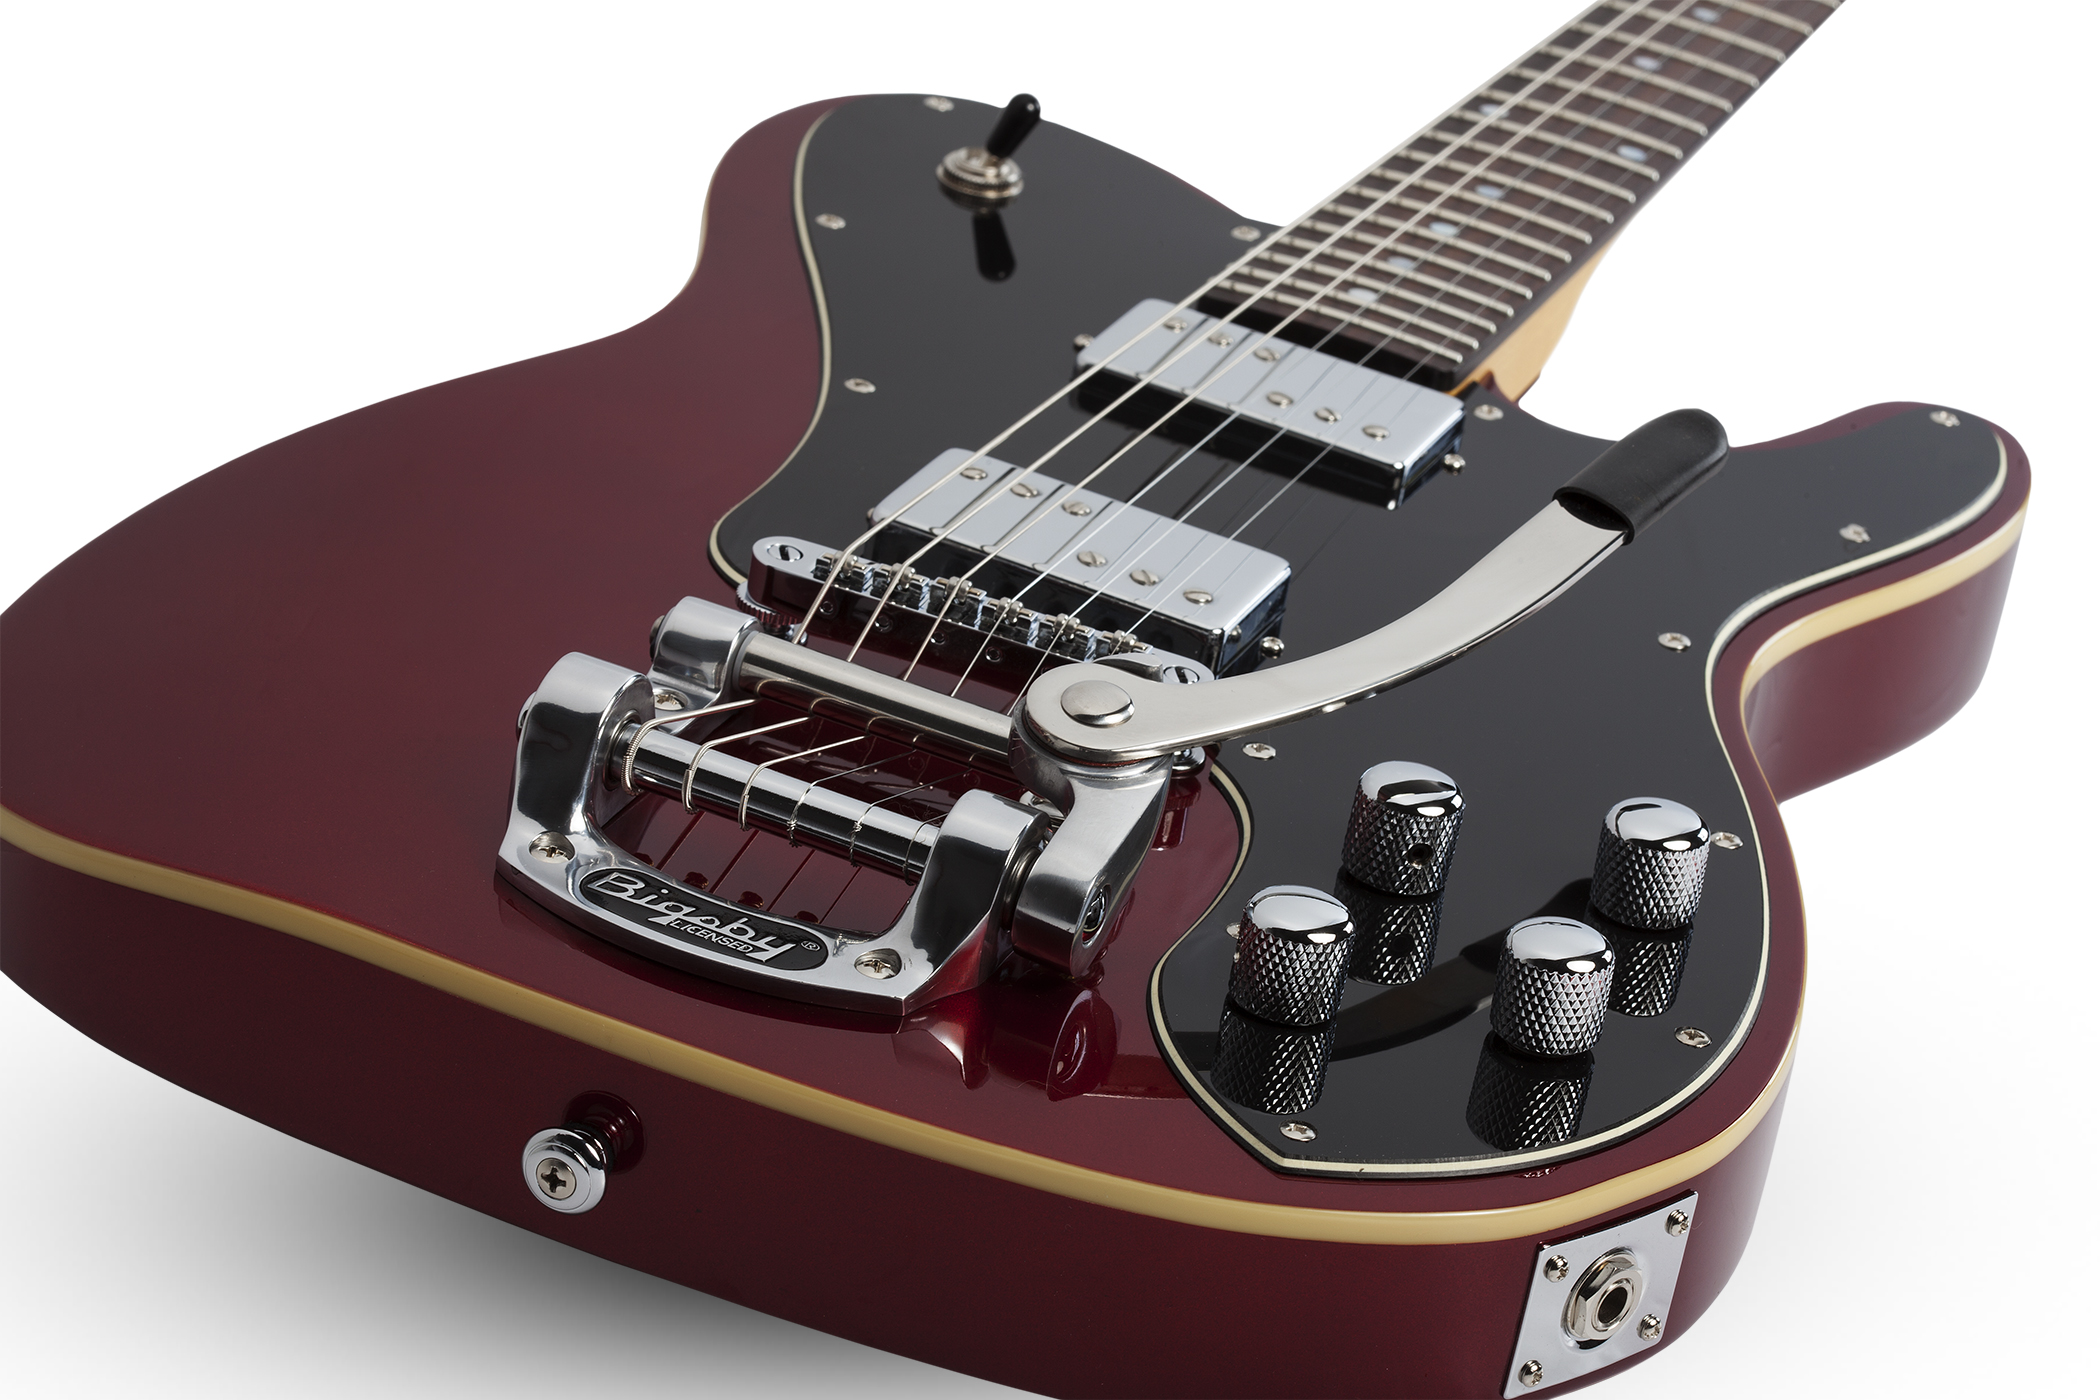 Schecter Pt Fastback Ii B Bigsby 2h Trem Bigsby Rw - Metallic Red - Guitare Électrique Forme Tel - Variation 2